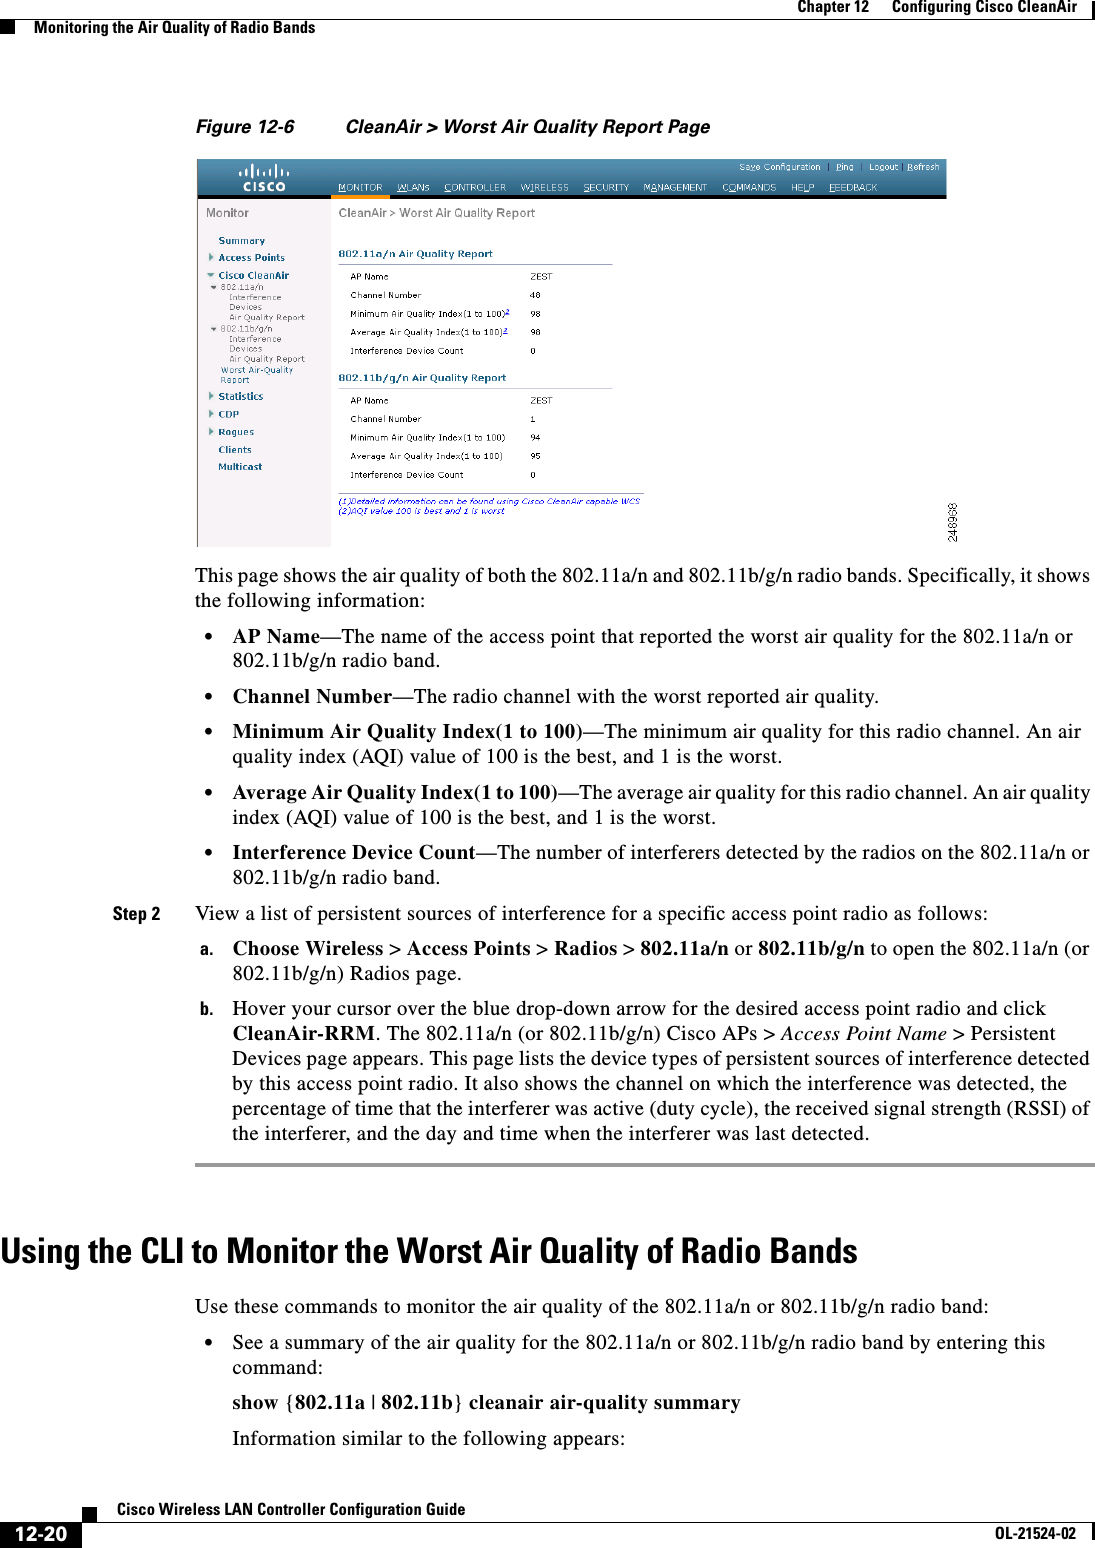  12-20Cisco Wireless LAN Controller Configuration GuideOL-21524-02Chapter 12      Configuring Cisco CleanAirMonitoring the Air Quality of Radio BandsFigure 12-6 CleanAir &gt; Worst Air Quality Report PageThis page shows the air quality of both the 802.11a/n and 802.11b/g/n radio bands. Specifically, it shows the following information:  • AP Name—The name of the access point that reported the worst air quality for the 802.11a/n or 802.11b/g/n radio band.  • Channel Number—The radio channel with the worst reported air quality.  • Minimum Air Quality Index(1 to 100)—The minimum air quality for this radio channel. An air quality index (AQI) value of 100 is the best, and 1 is the worst.  • Average Air Quality Index(1 to 100)—The average air quality for this radio channel. An air quality index (AQI) value of 100 is the best, and 1 is the worst.  • Interference Device Count—The number of interferers detected by the radios on the 802.11a/n or 802.11b/g/n radio band.Step 2 View a list of persistent sources of interference for a specific access point radio as follows:a. Choose Wireless &gt; Access Points &gt; Radios &gt; 802.11a/n or 802.11b/g/n to open the 802.11a/n (or 802.11b/g/n) Radios page.b. Hover your cursor over the blue drop-down arrow for the desired access point radio and click CleanAir-RRM. The 802.11a/n (or 802.11b/g/n) Cisco APs &gt; Access Point Name &gt; Persistent Devices page appears. This page lists the device types of persistent sources of interference detected by this access point radio. It also shows the channel on which the interference was detected, the percentage of time that the interferer was active (duty cycle), the received signal strength (RSSI) of the interferer, and the day and time when the interferer was last detected.Using the CLI to Monitor the Worst Air Quality of Radio BandsUse these commands to monitor the air quality of the 802.11a/n or 802.11b/g/n radio band:  • See a summary of the air quality for the 802.11a/n or 802.11b/g/n radio band by entering this command:show {802.11a | 802.11b} cleanair air-quality summaryInformation similar to the following appears: